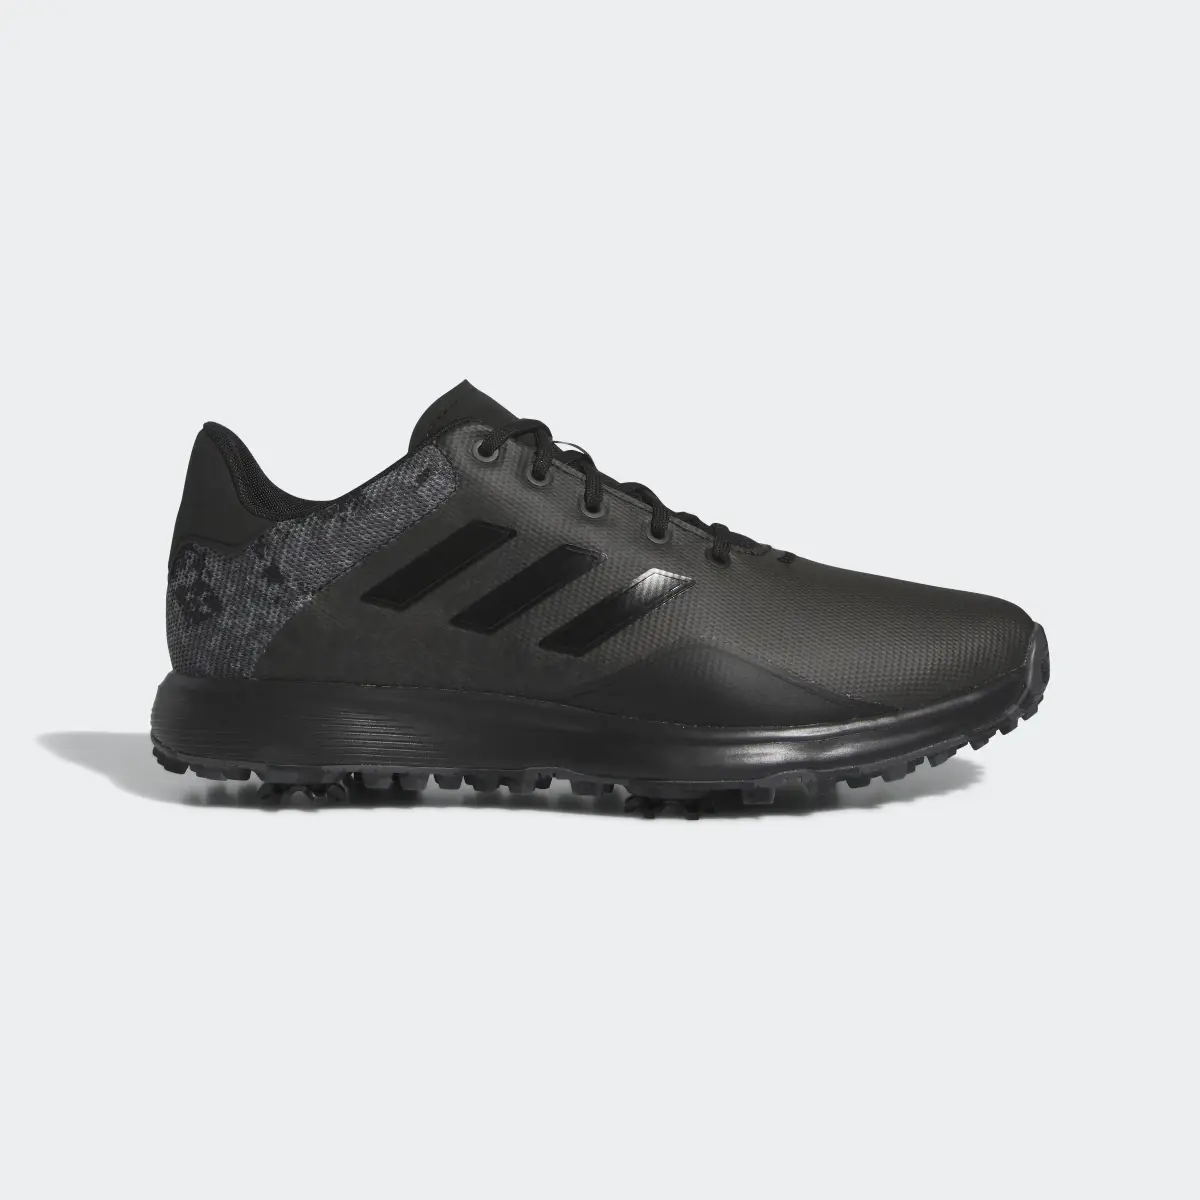 Adidas S2G Shoes. 2